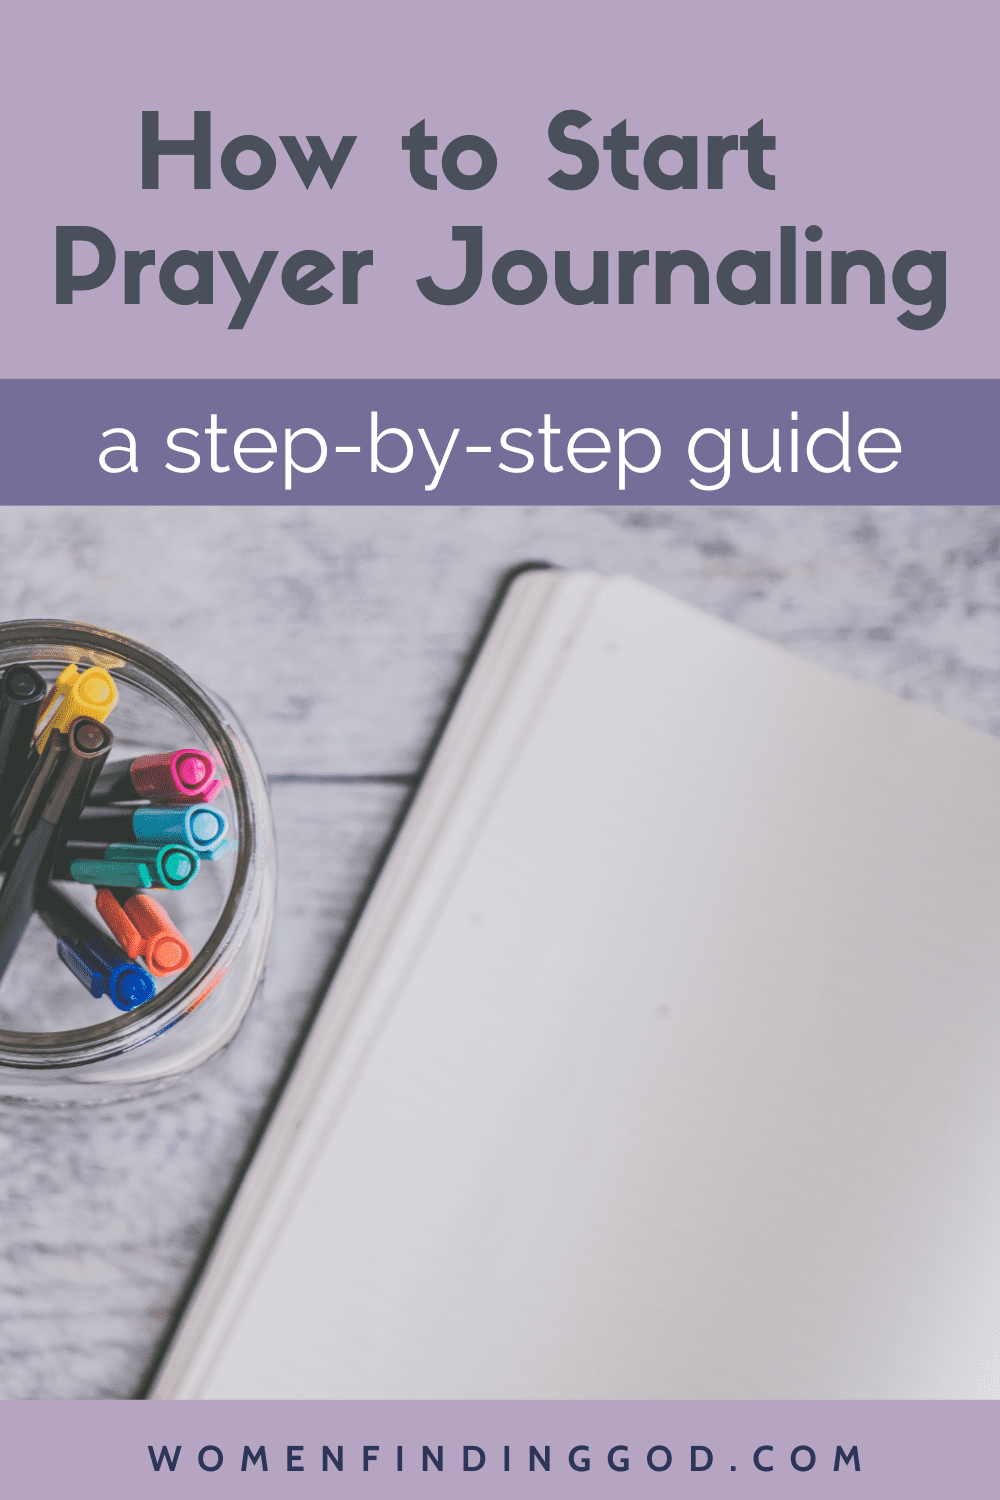 Are you ready to learn how to make a prayer journal? Learn the three reasons to start a prayer journal and three benefits to writing down your prayers - without having to deal with overwhelm. Plus, tips about what to put in your prayer journal and how to make your own prayer journal or prayer binder. via @womenfindinggod